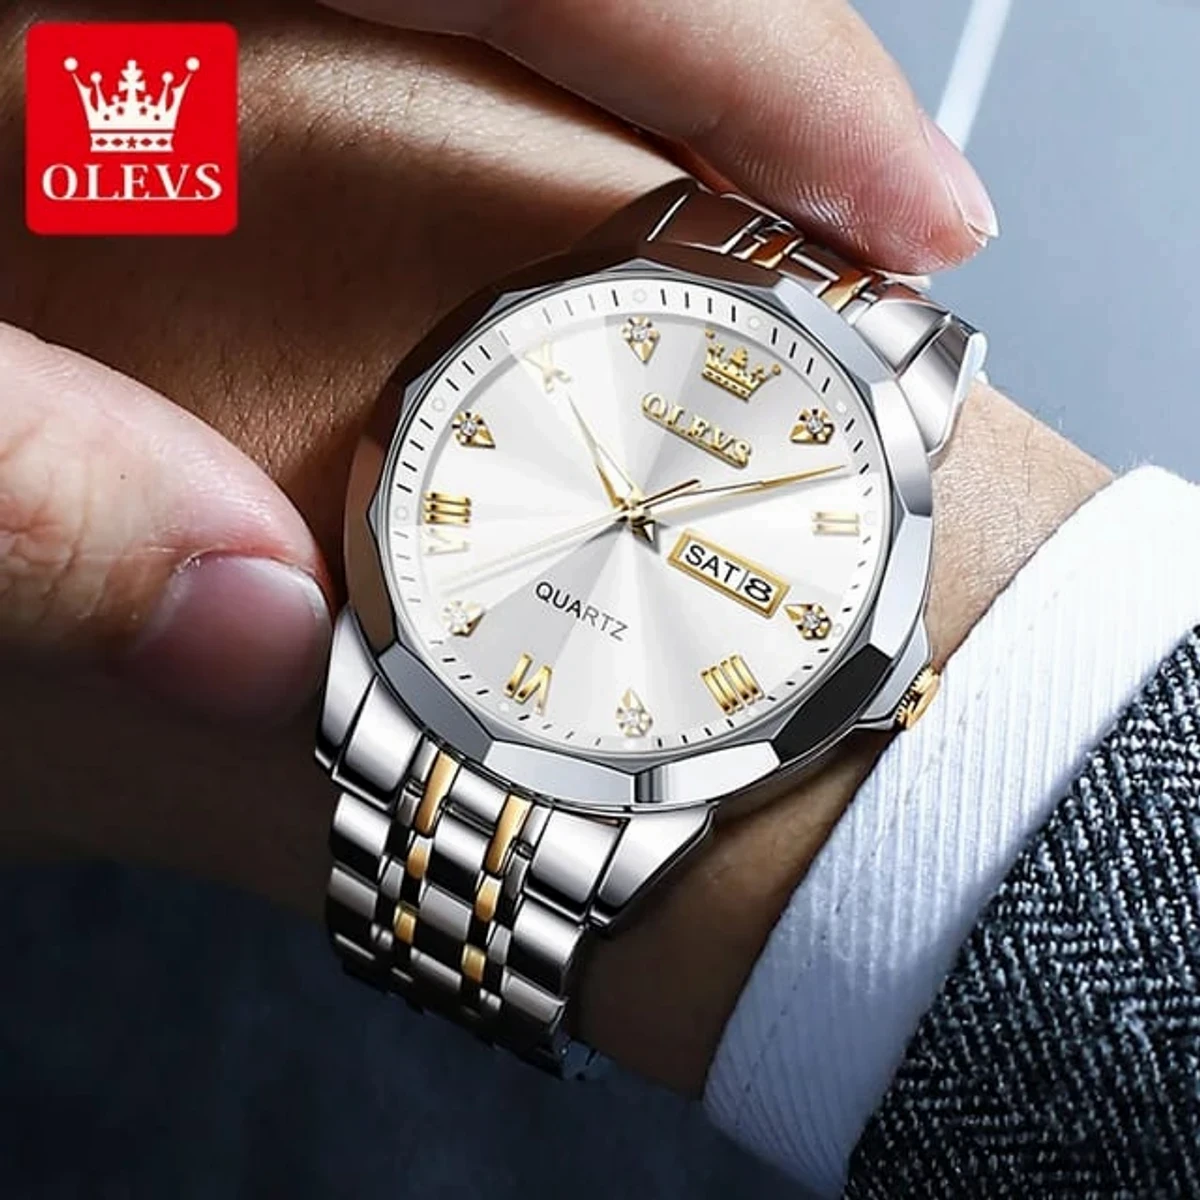 OLEVS MODEL 9931 Watch for Men Stainless Steel Watches - 9941 FULL SILVER COOLER WATCH- MAN WATCH